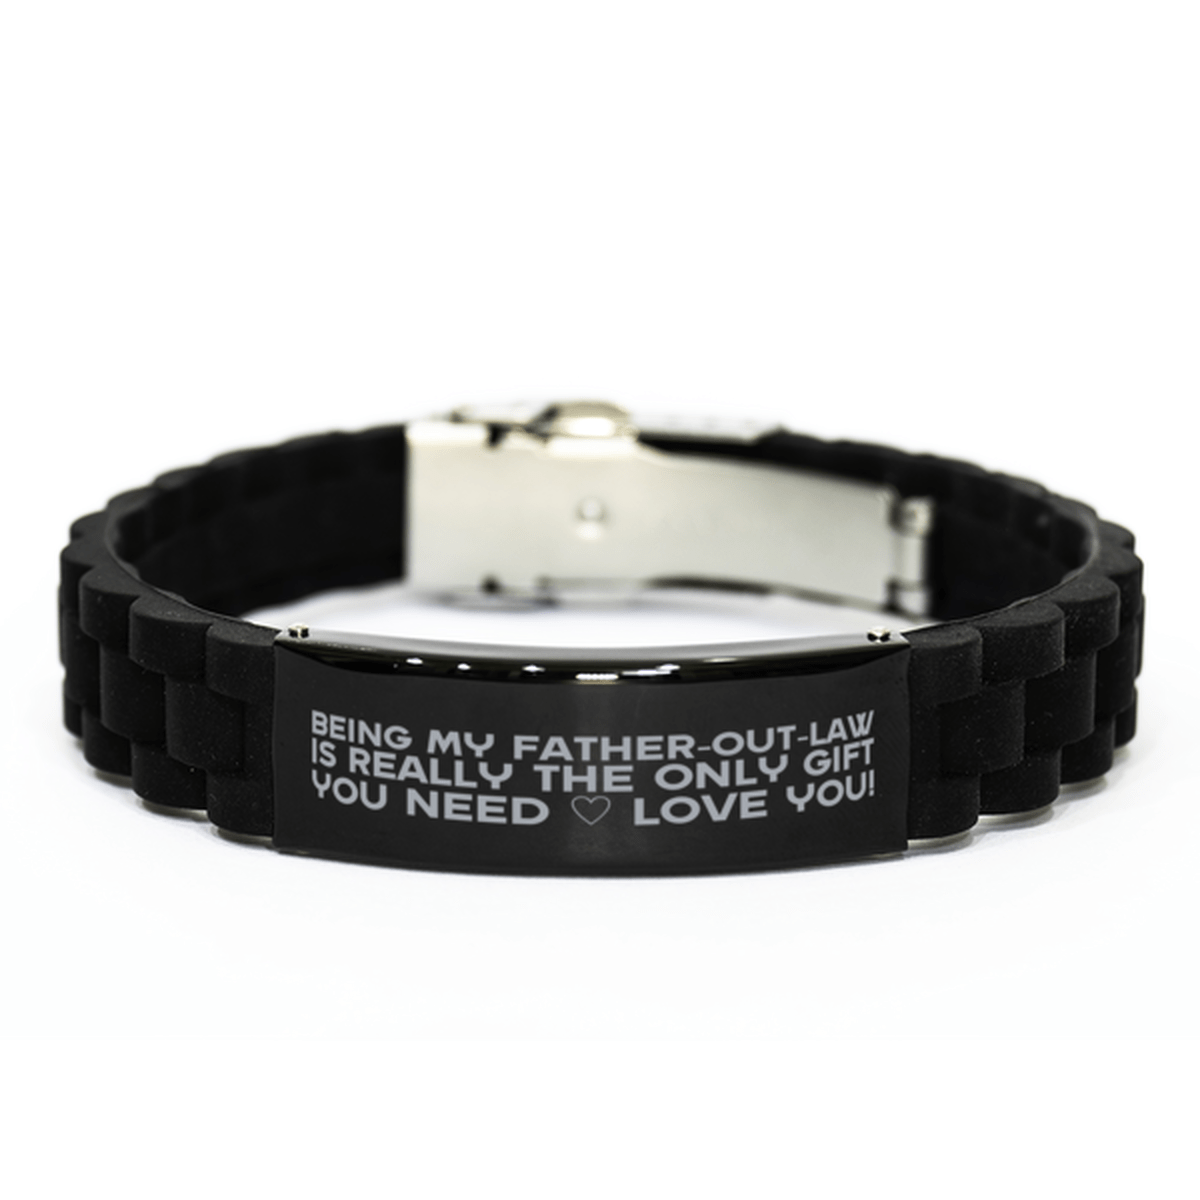 Funny Father-out-law Bracelet, Being My Father-out-law Is Really the Only Gift You Need, Best Birthday Gifts for Father-out-law